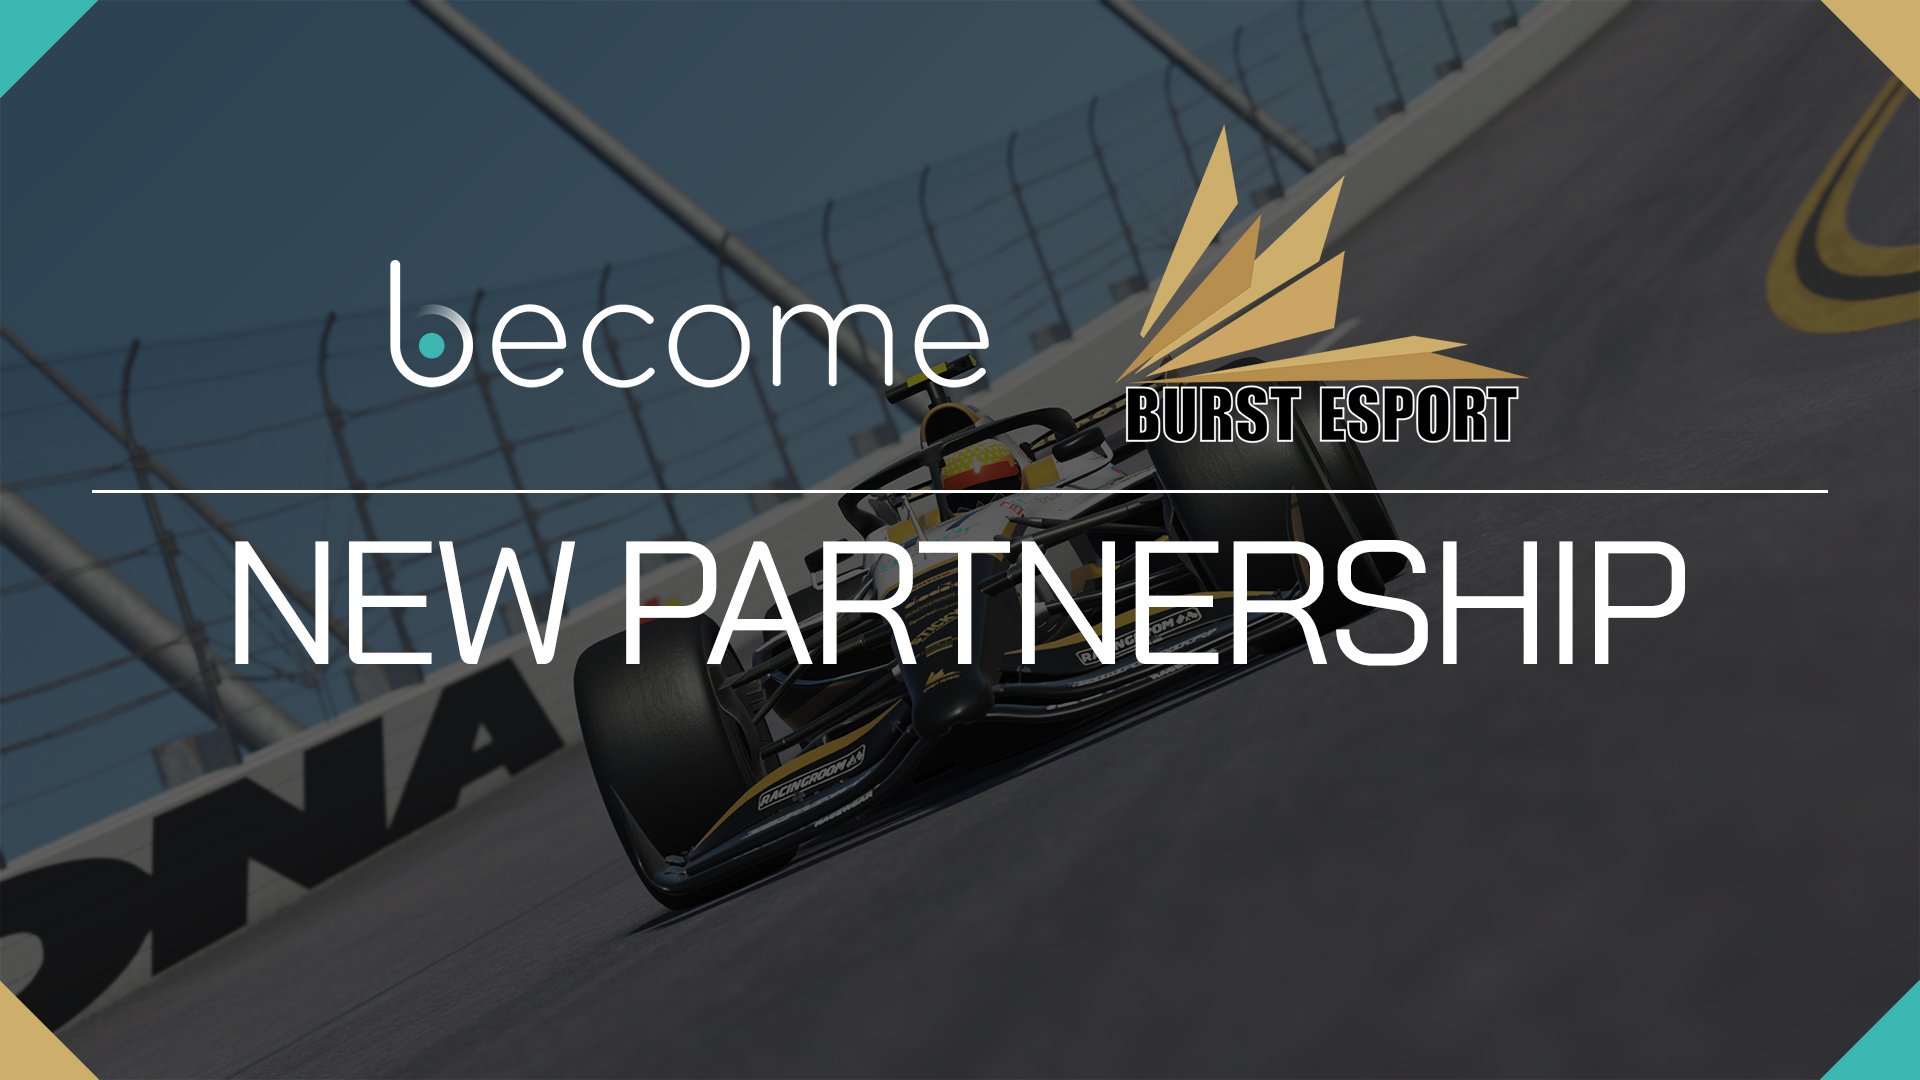 Burst Esport and Become - Partnership announcement